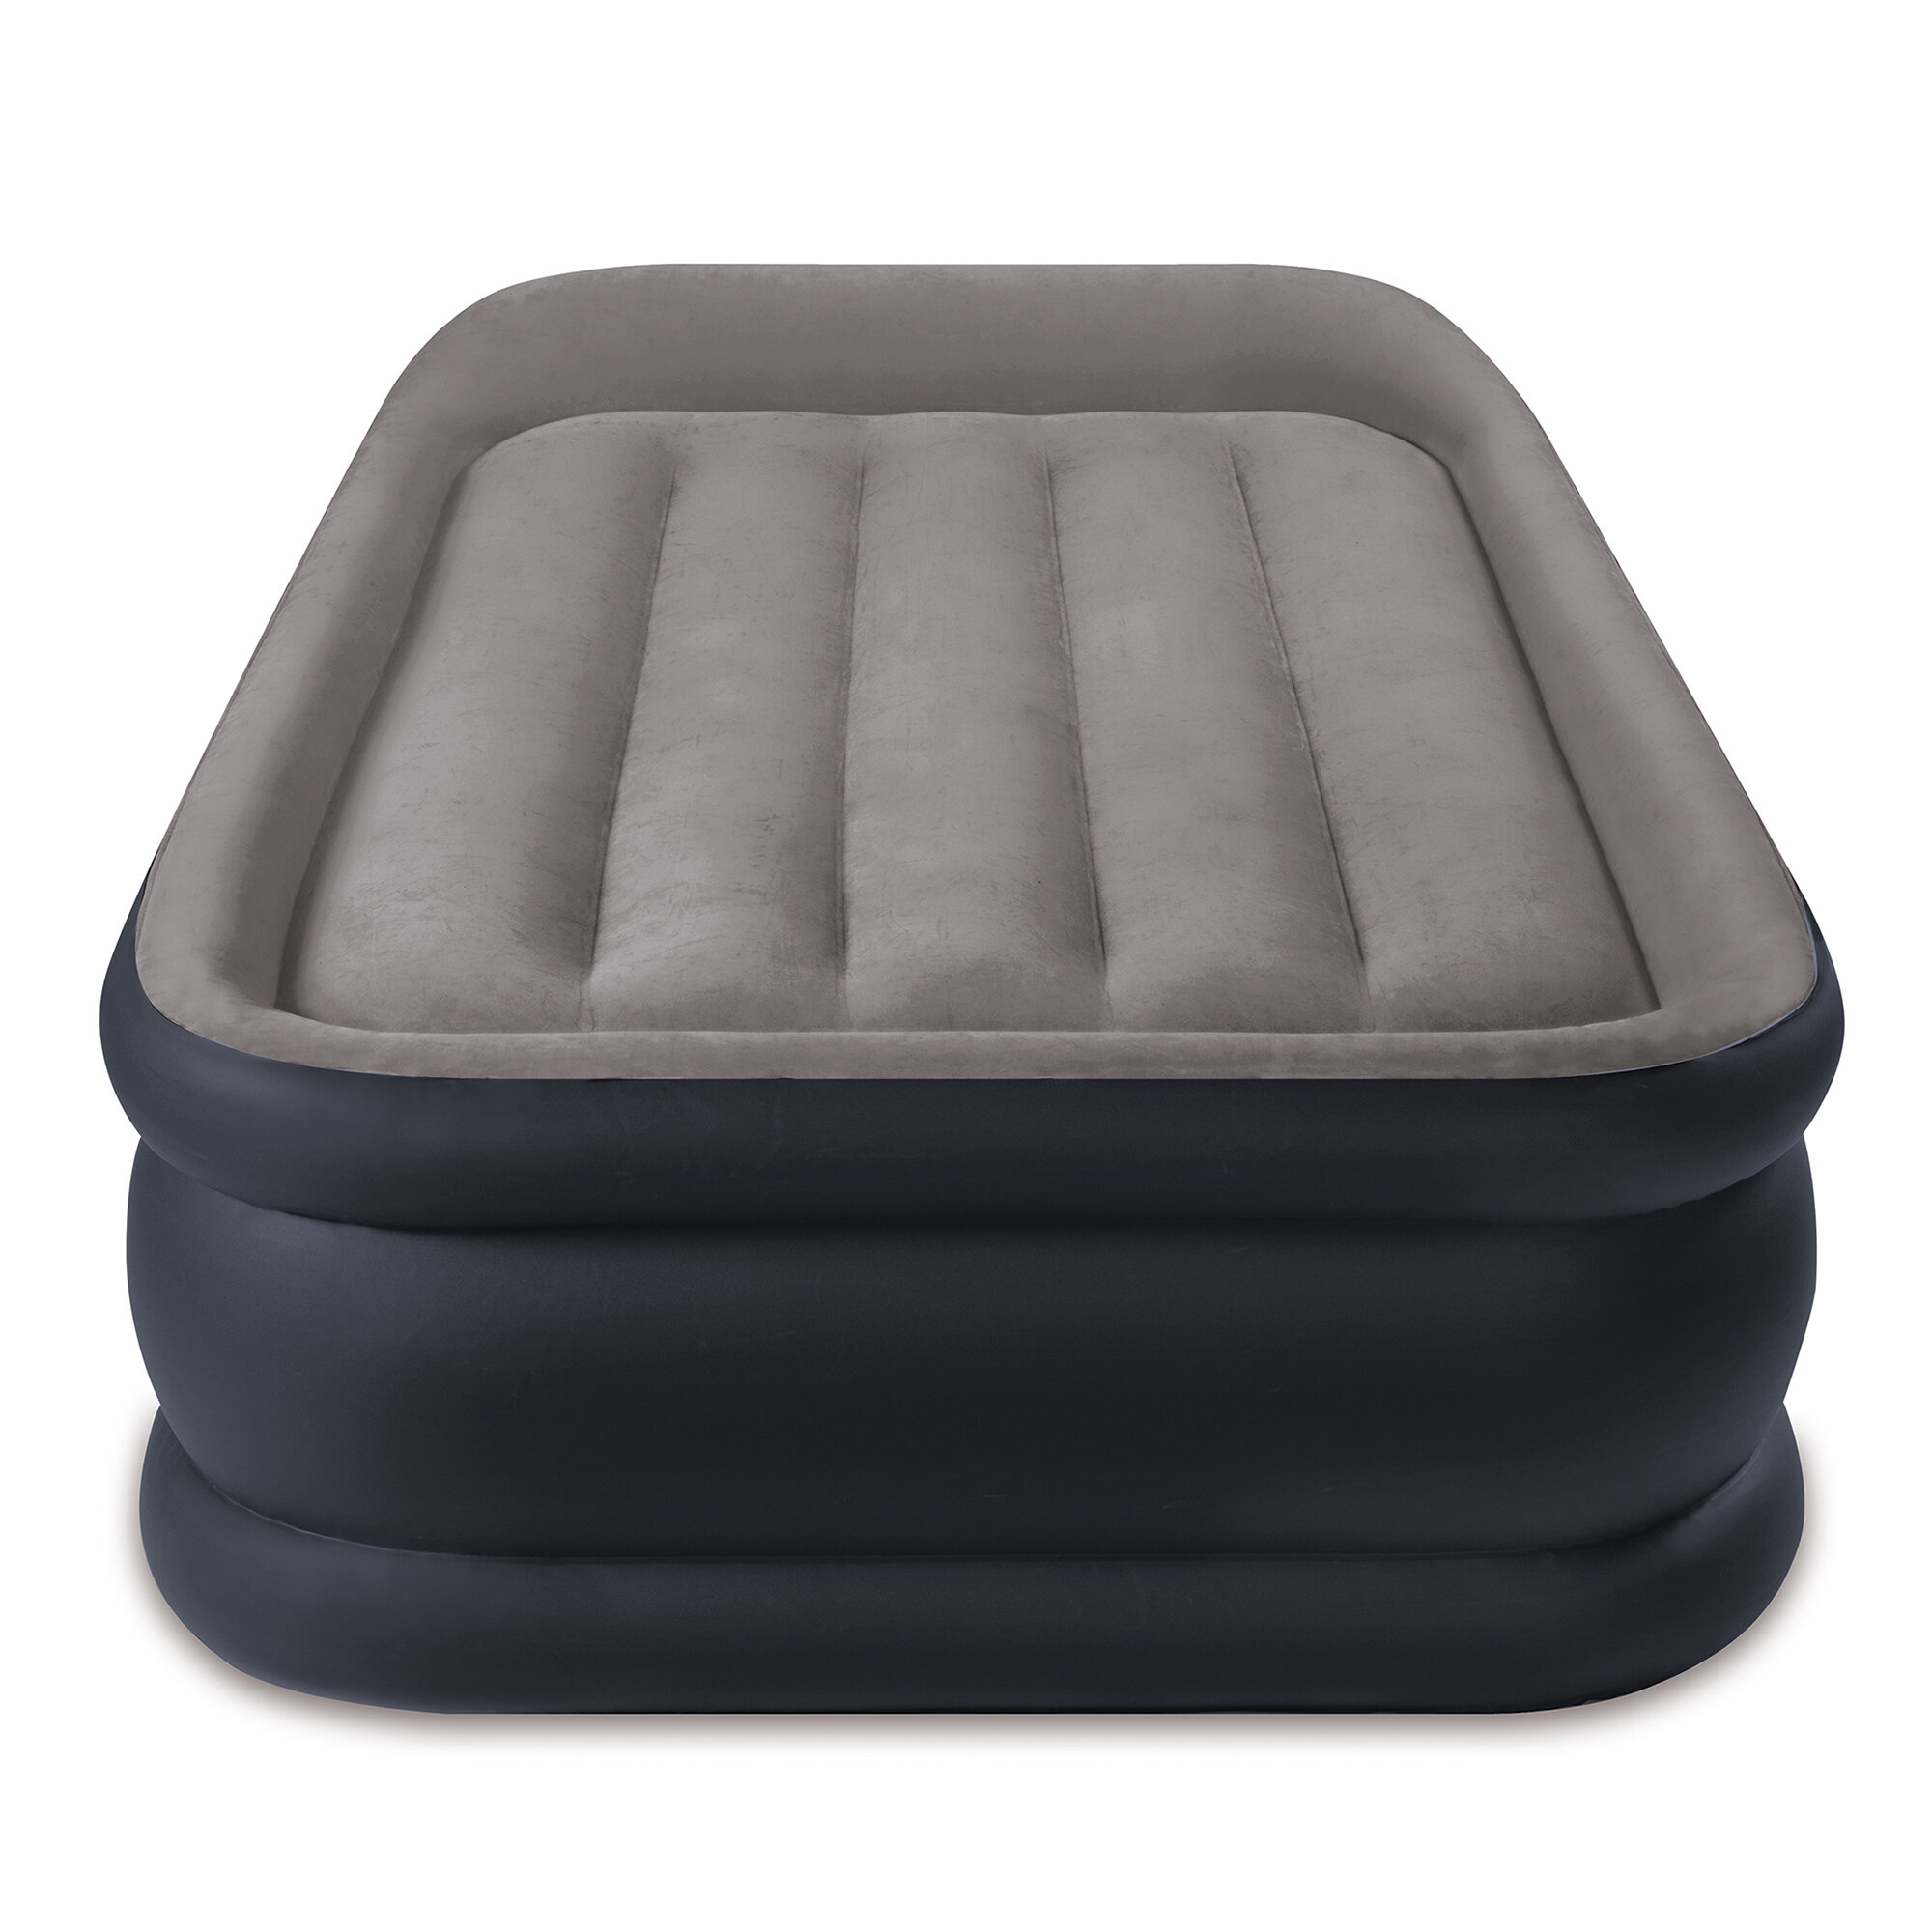 Intex 64121ED Twin Pillow Rest Raised Airbed for sale online 